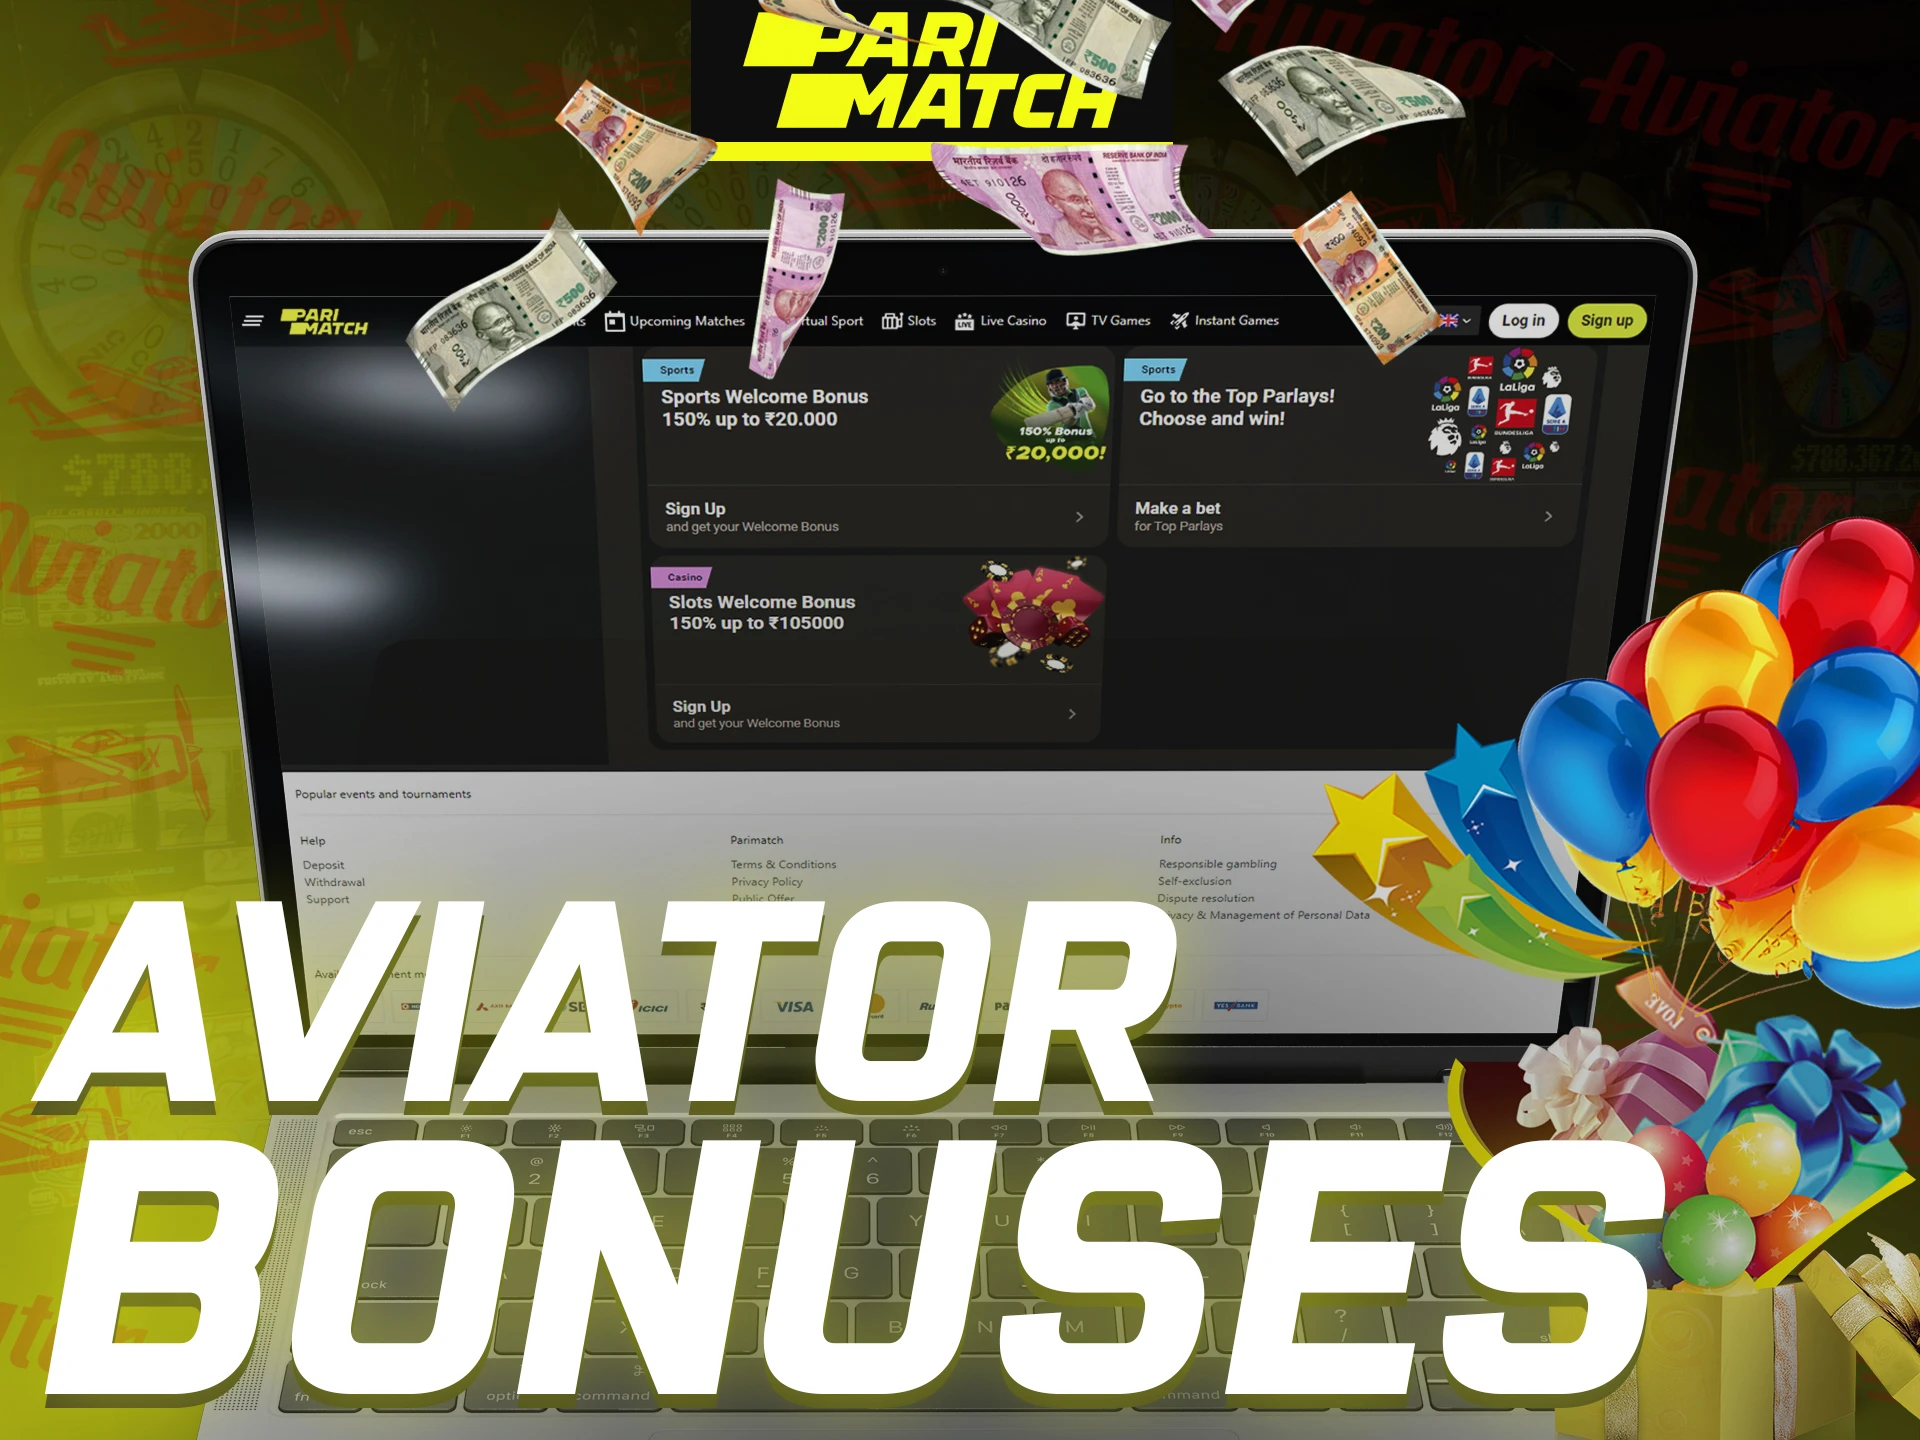 Use casino bonuses for newcomers provided by Parimatch.